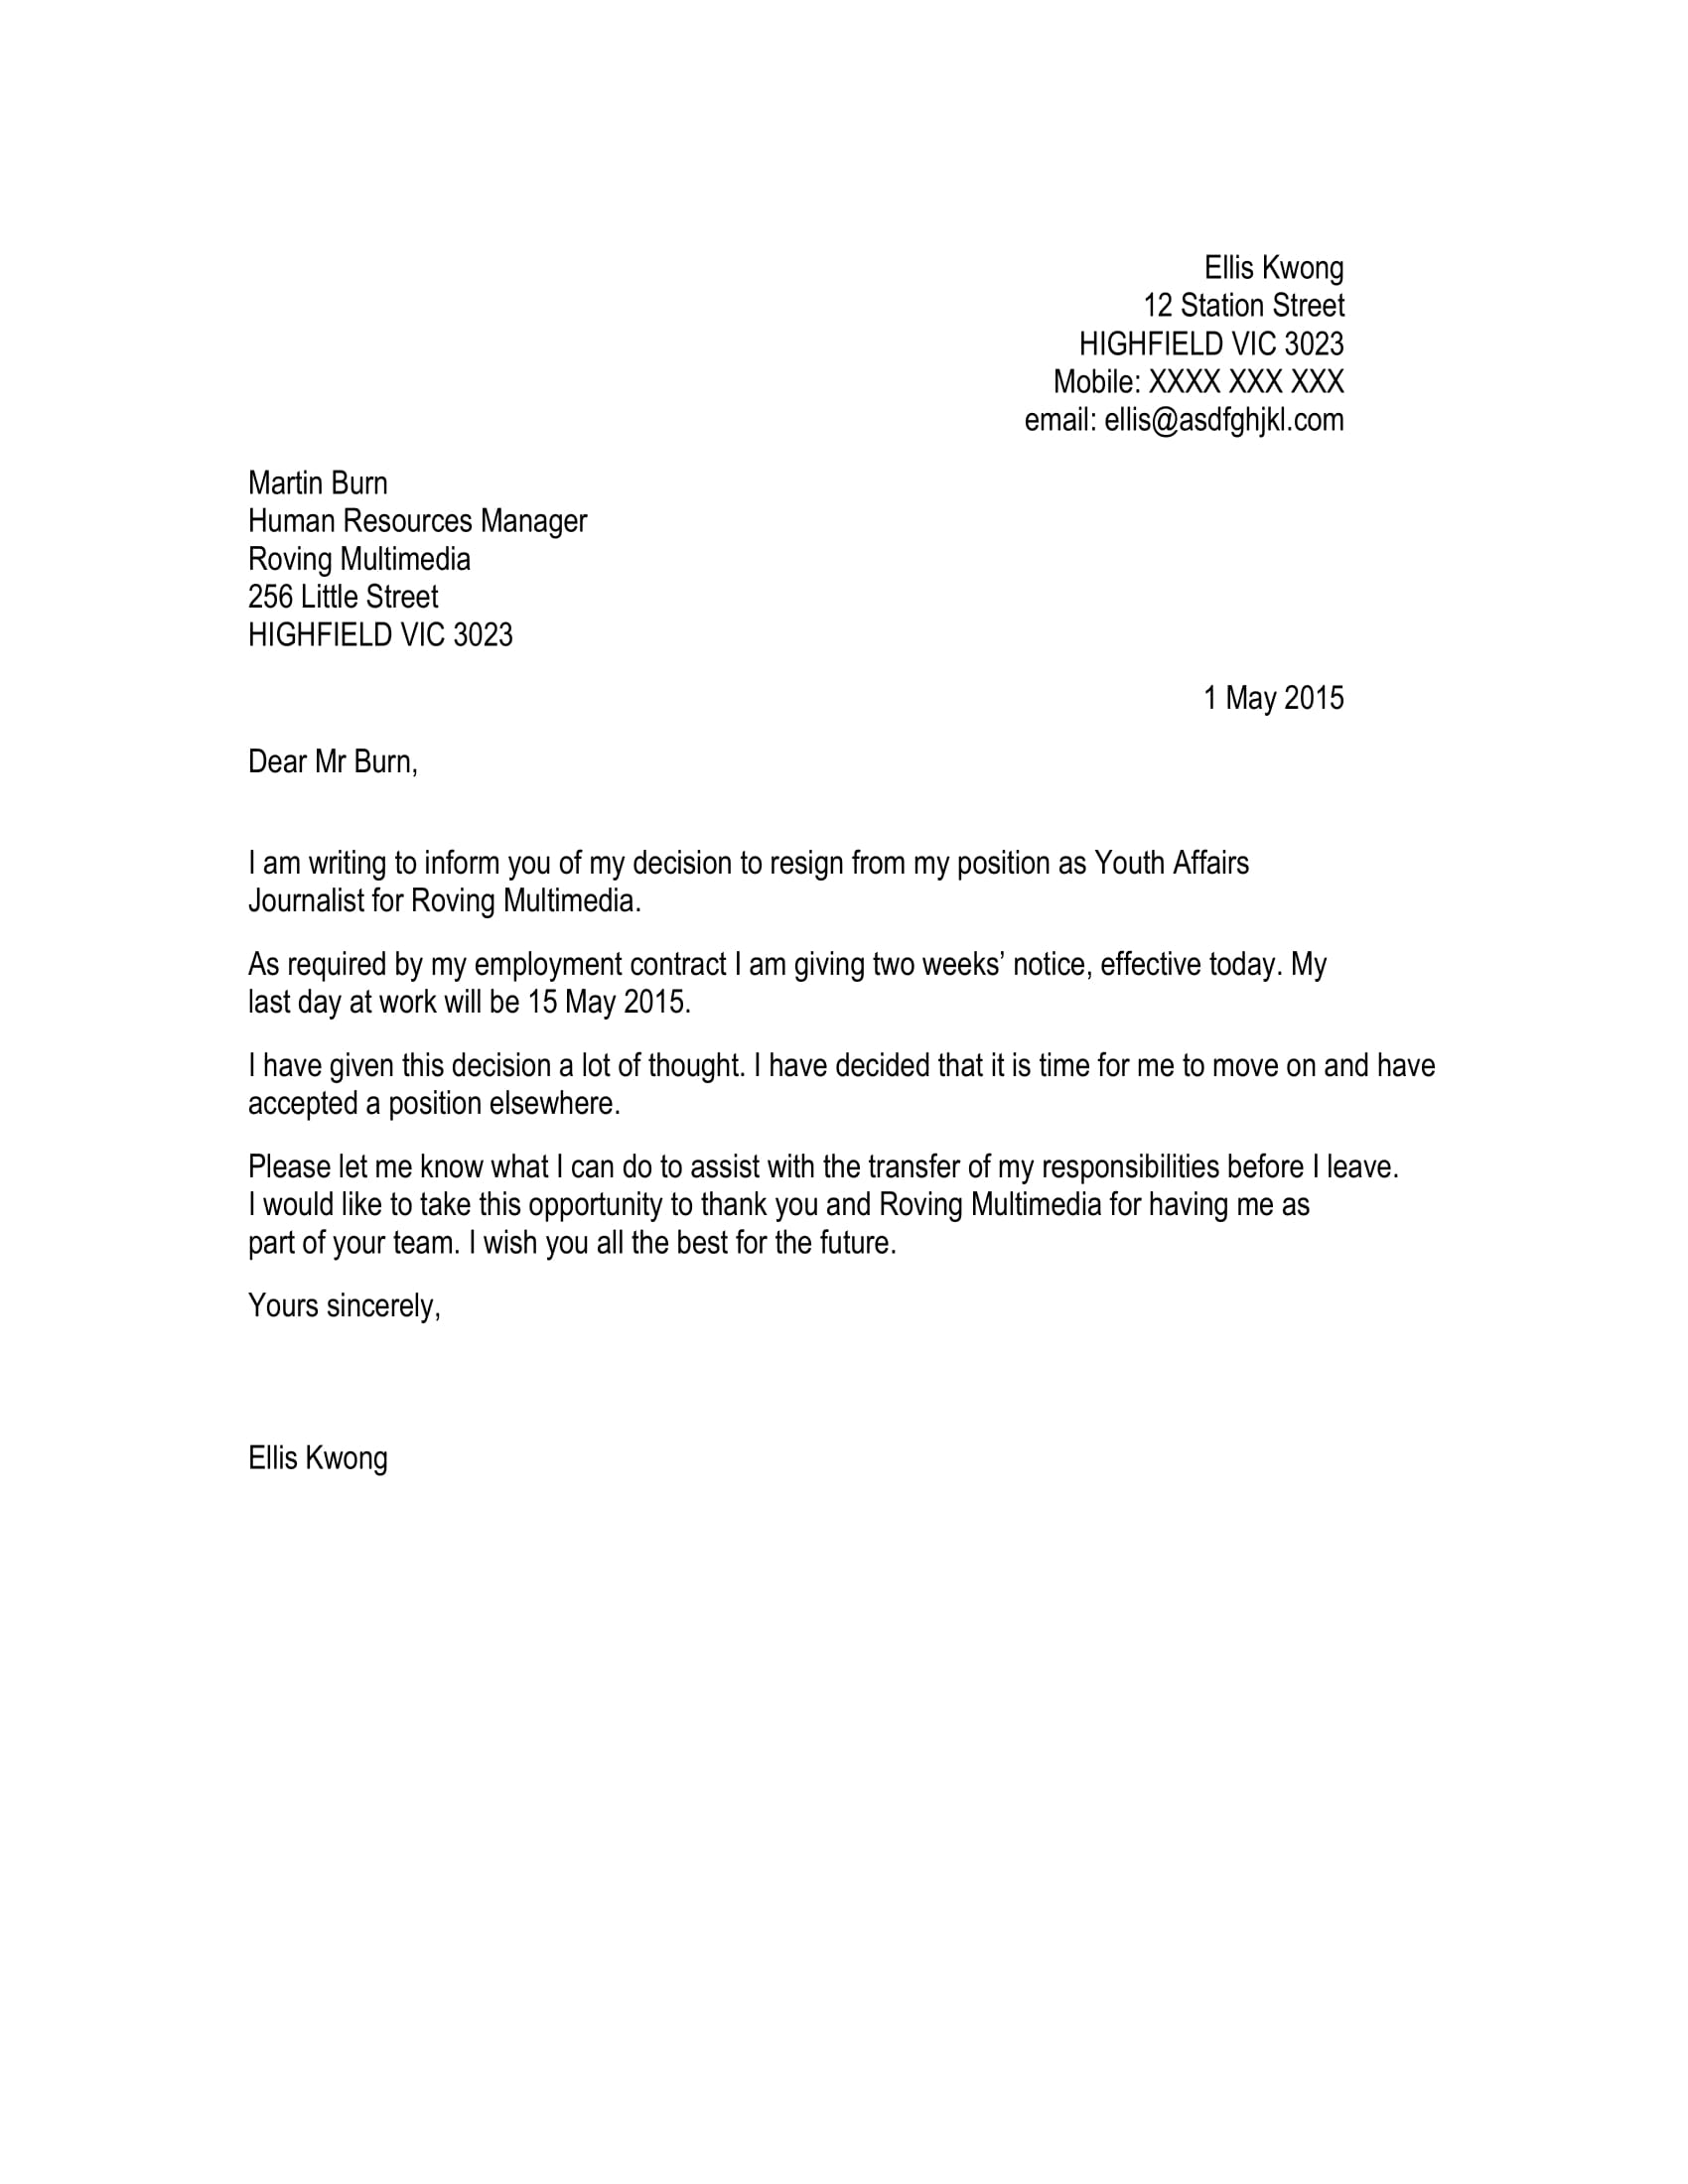 2 Week Notice Resignation Letter from images.examples.com